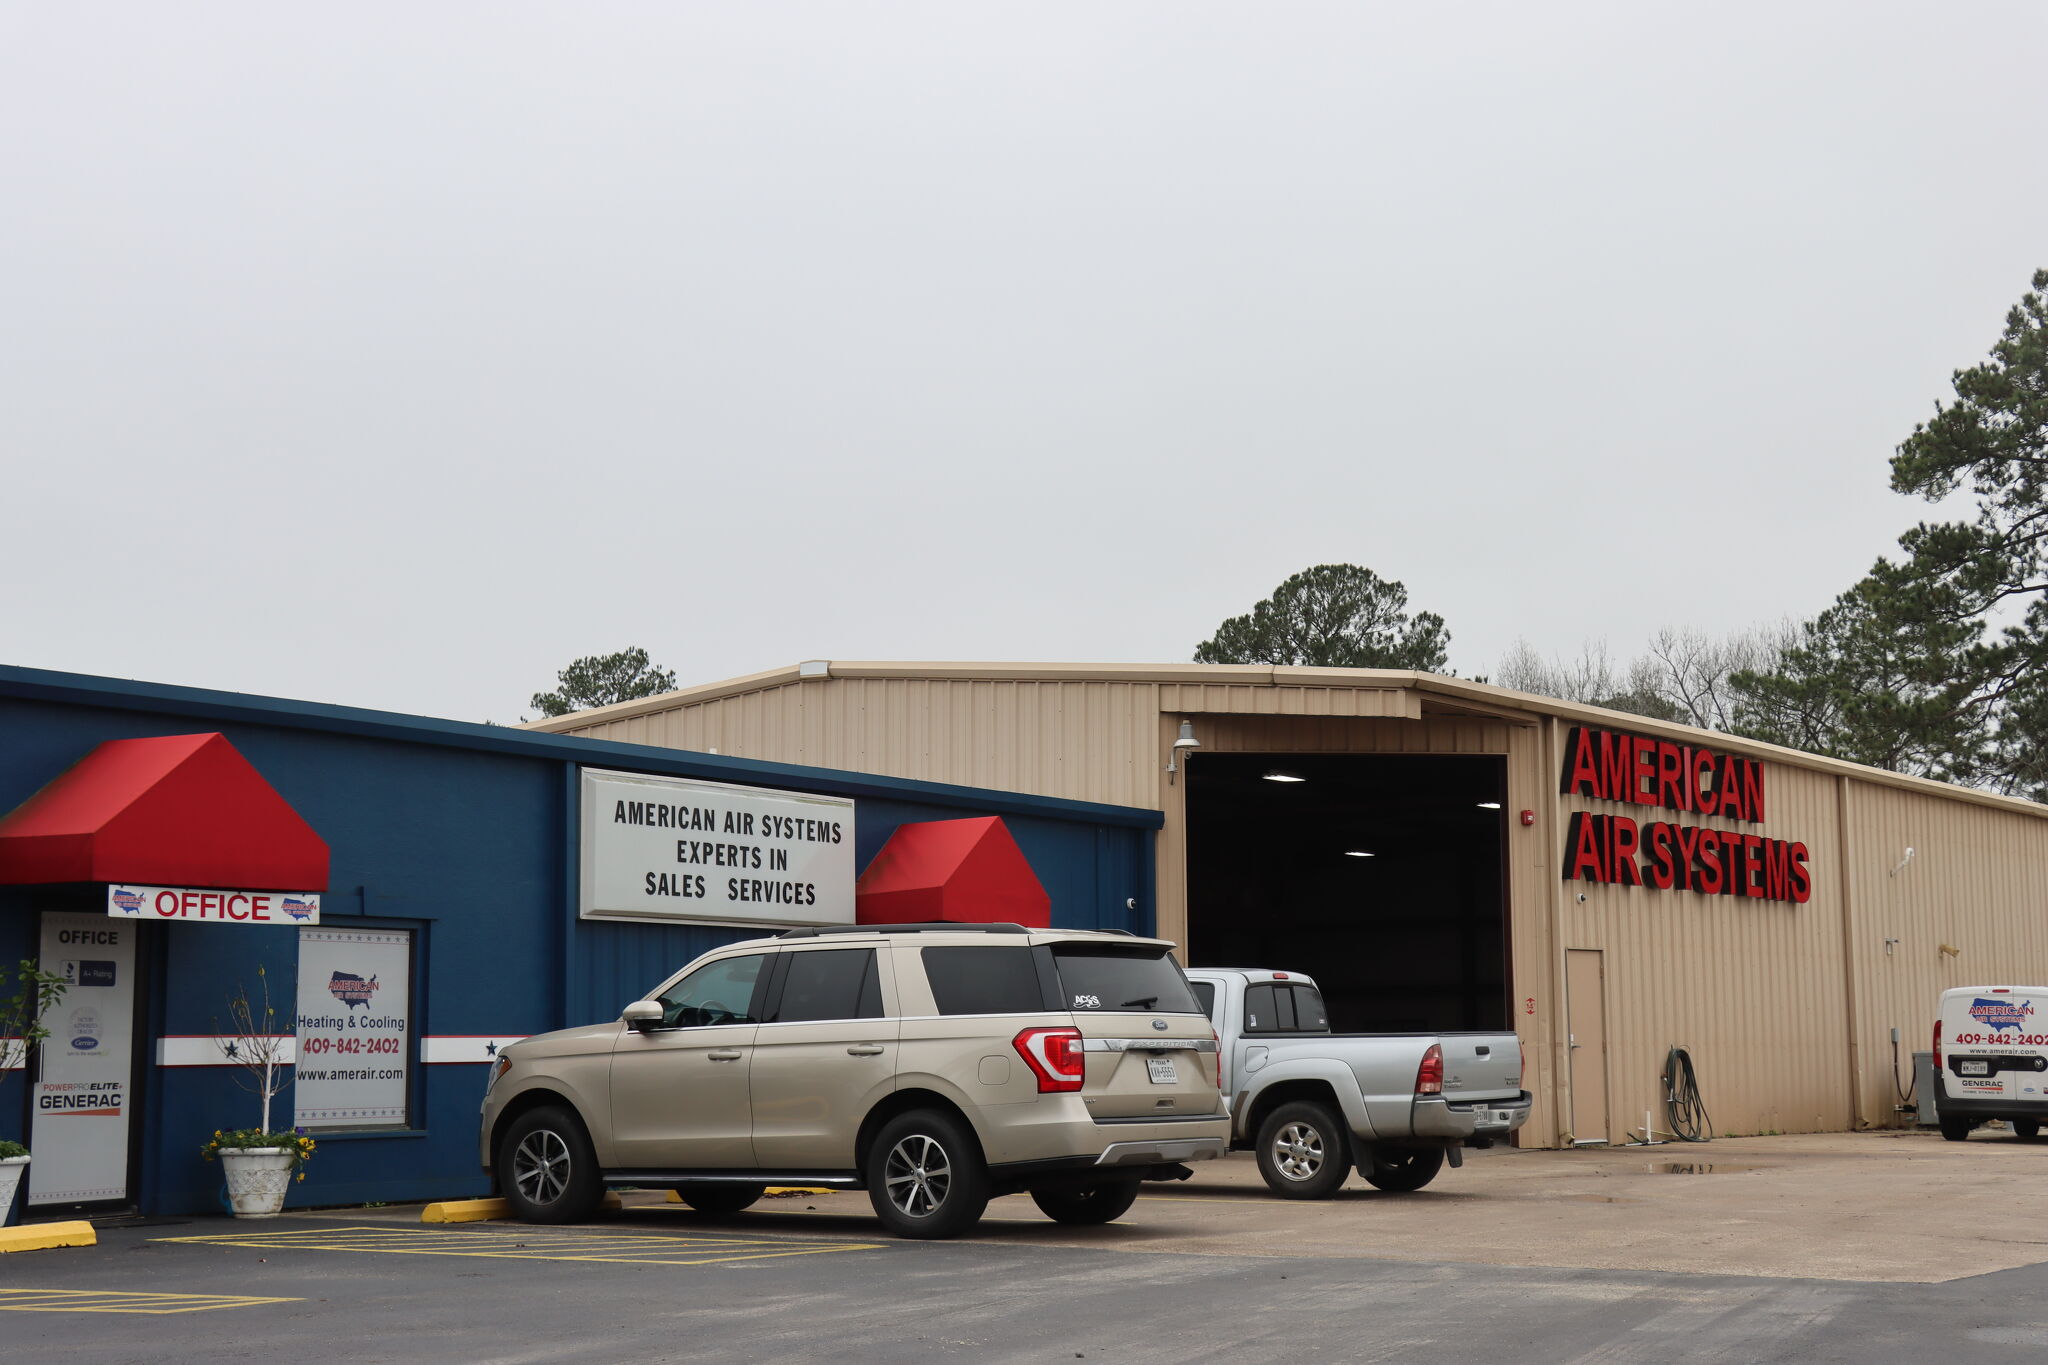 Air conditioning company has a new Lumberton location